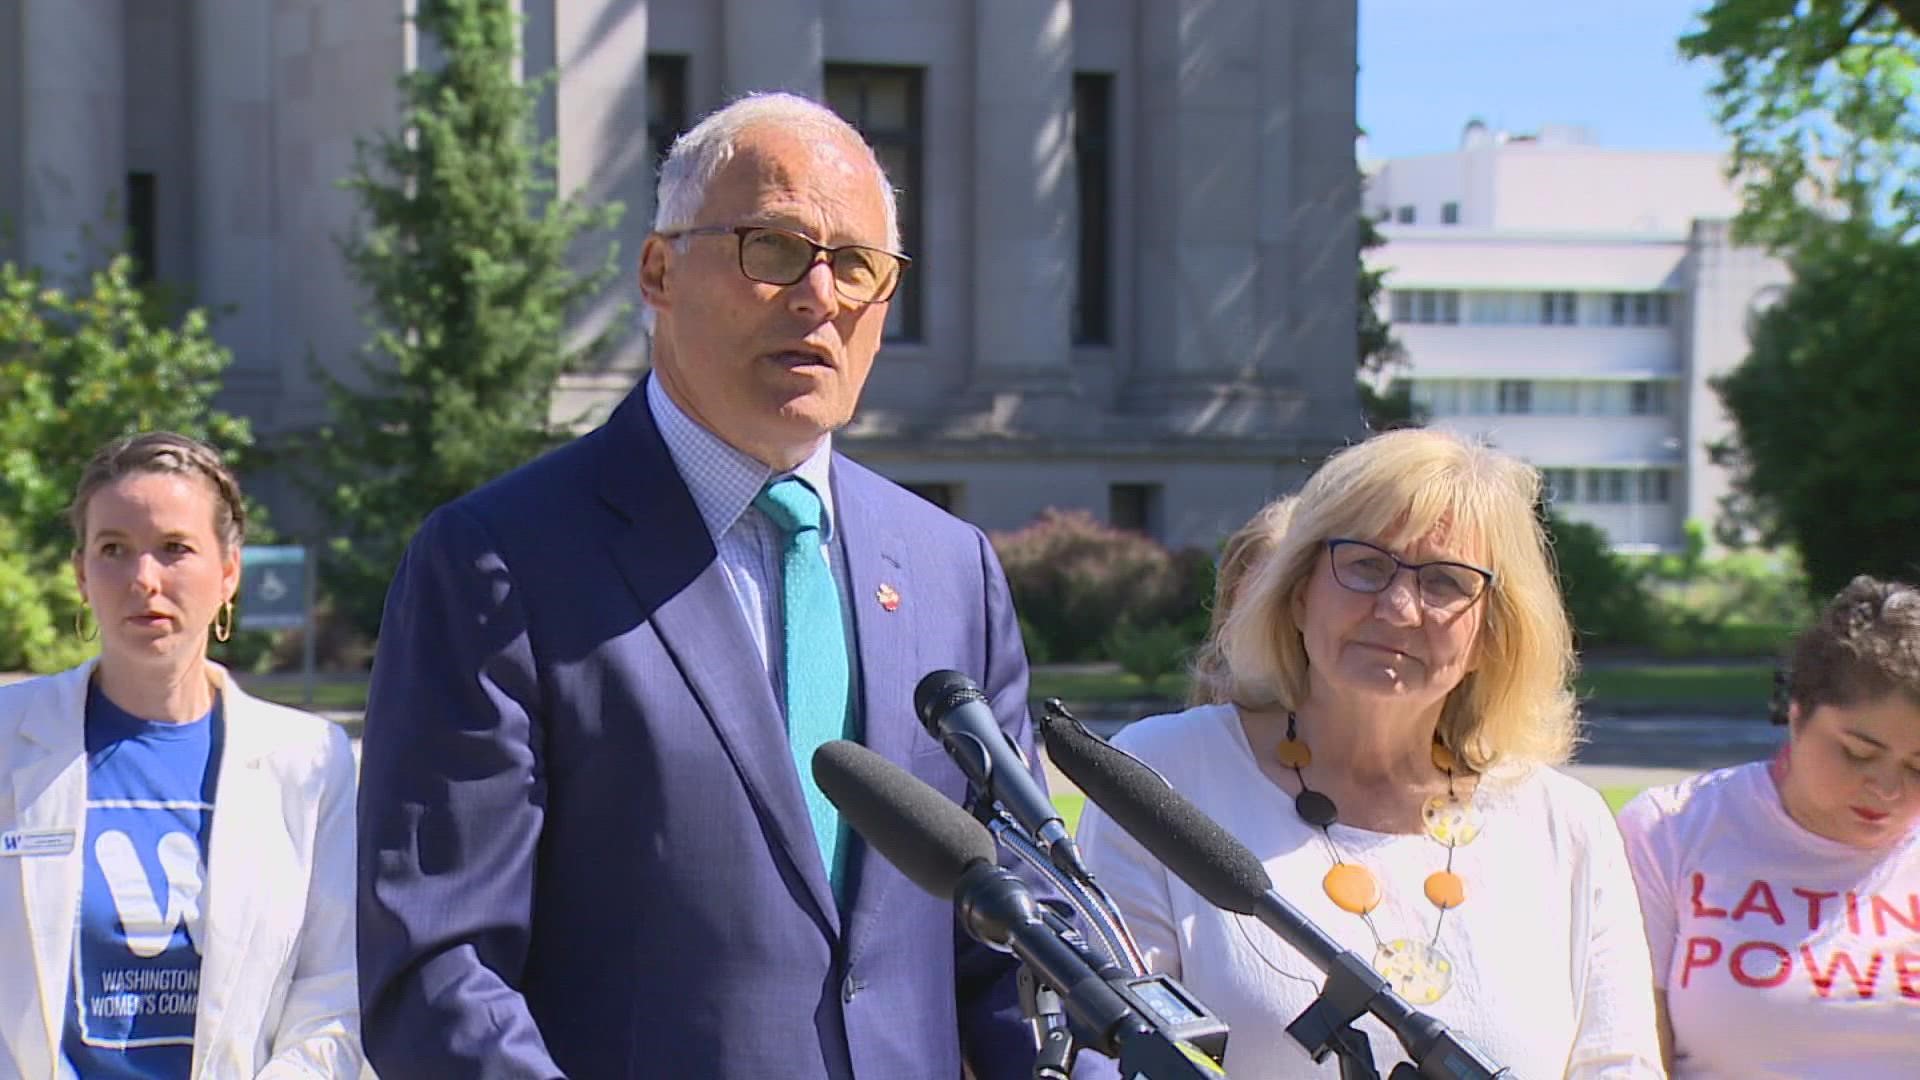 Gov. Inslee outlined how the state intends to shield patients who travel to Washington seeking abortions from being pursued by authorities in other states.